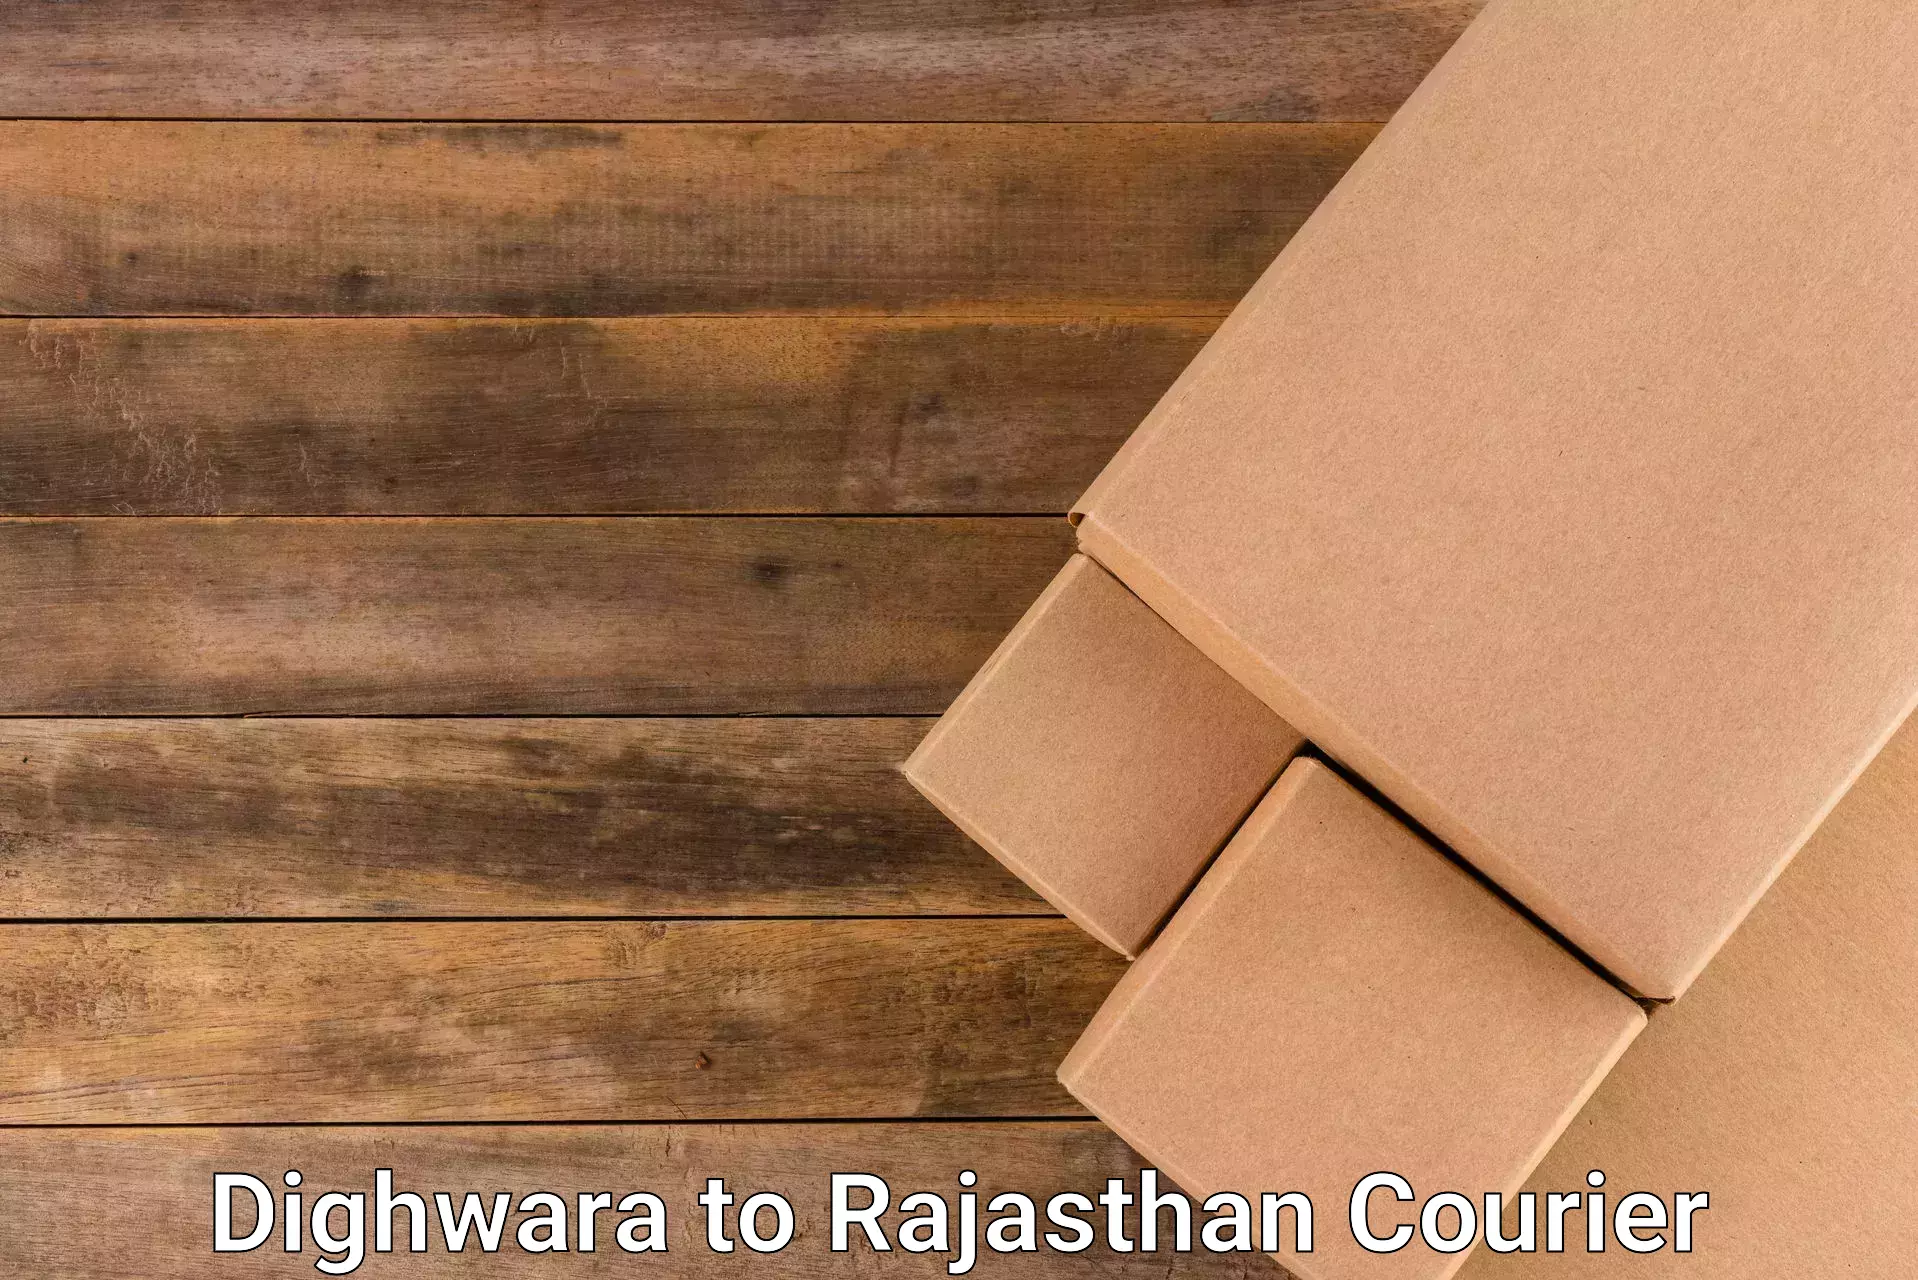 Reliable delivery network Dighwara to Sawai Madhopur